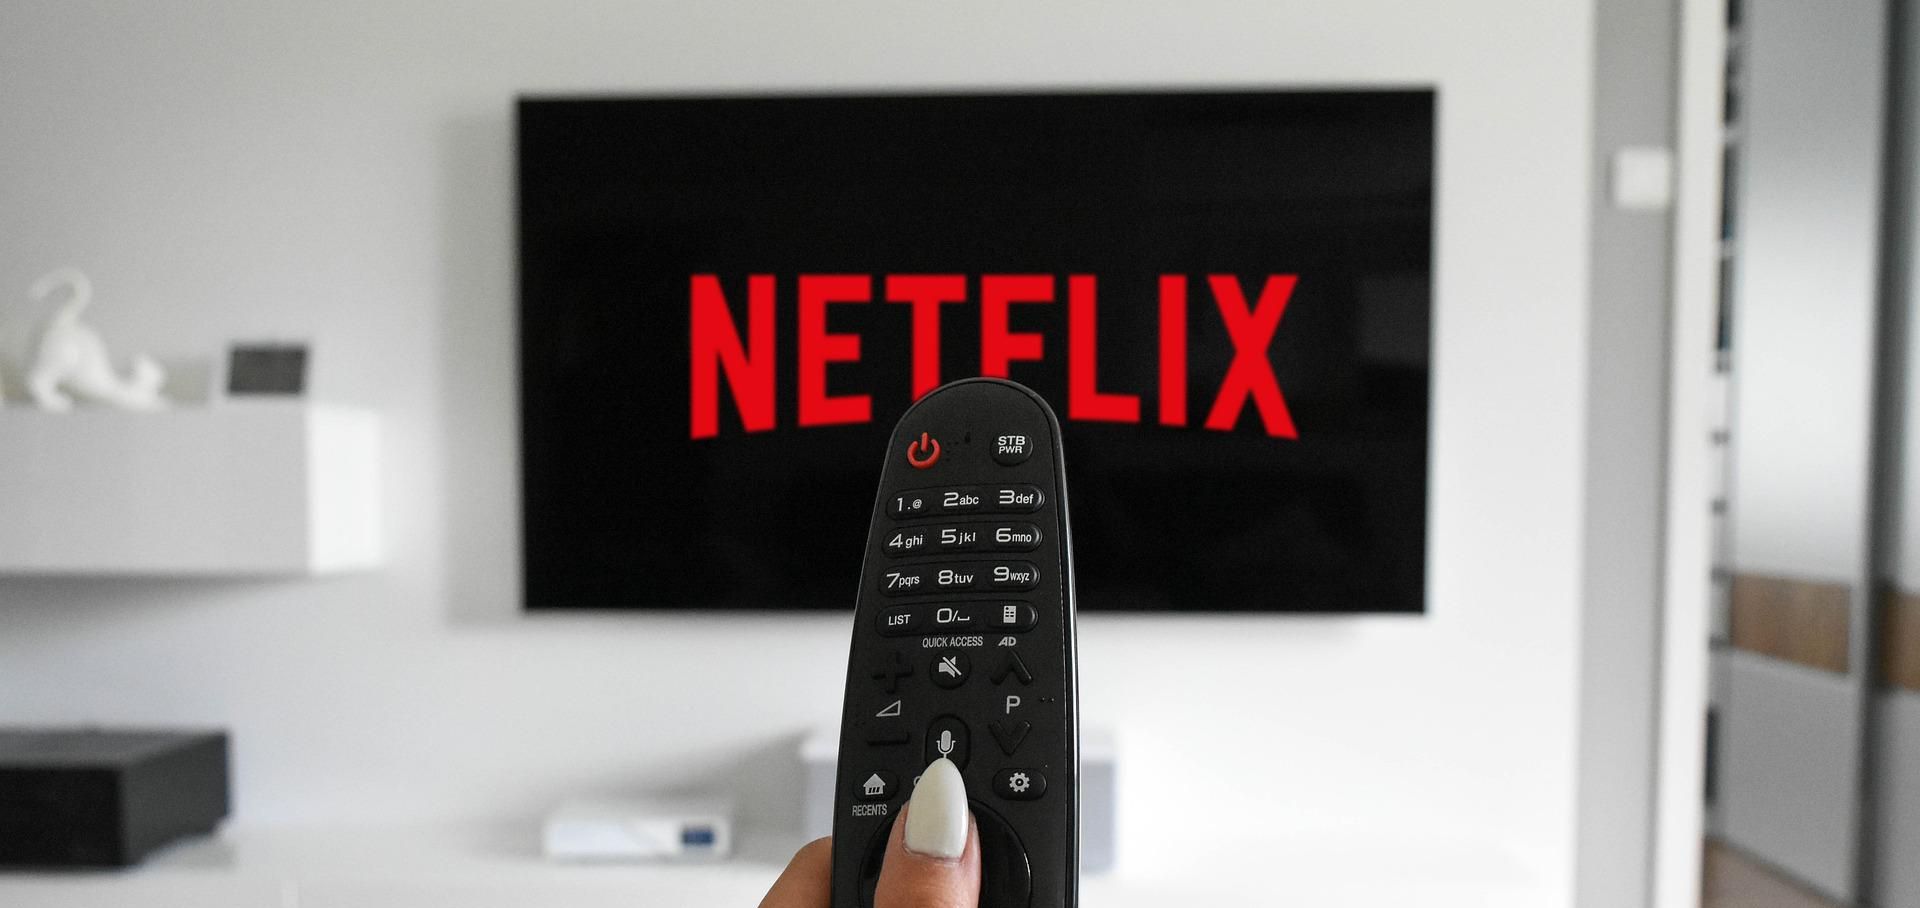 person using remote to put netflix on television